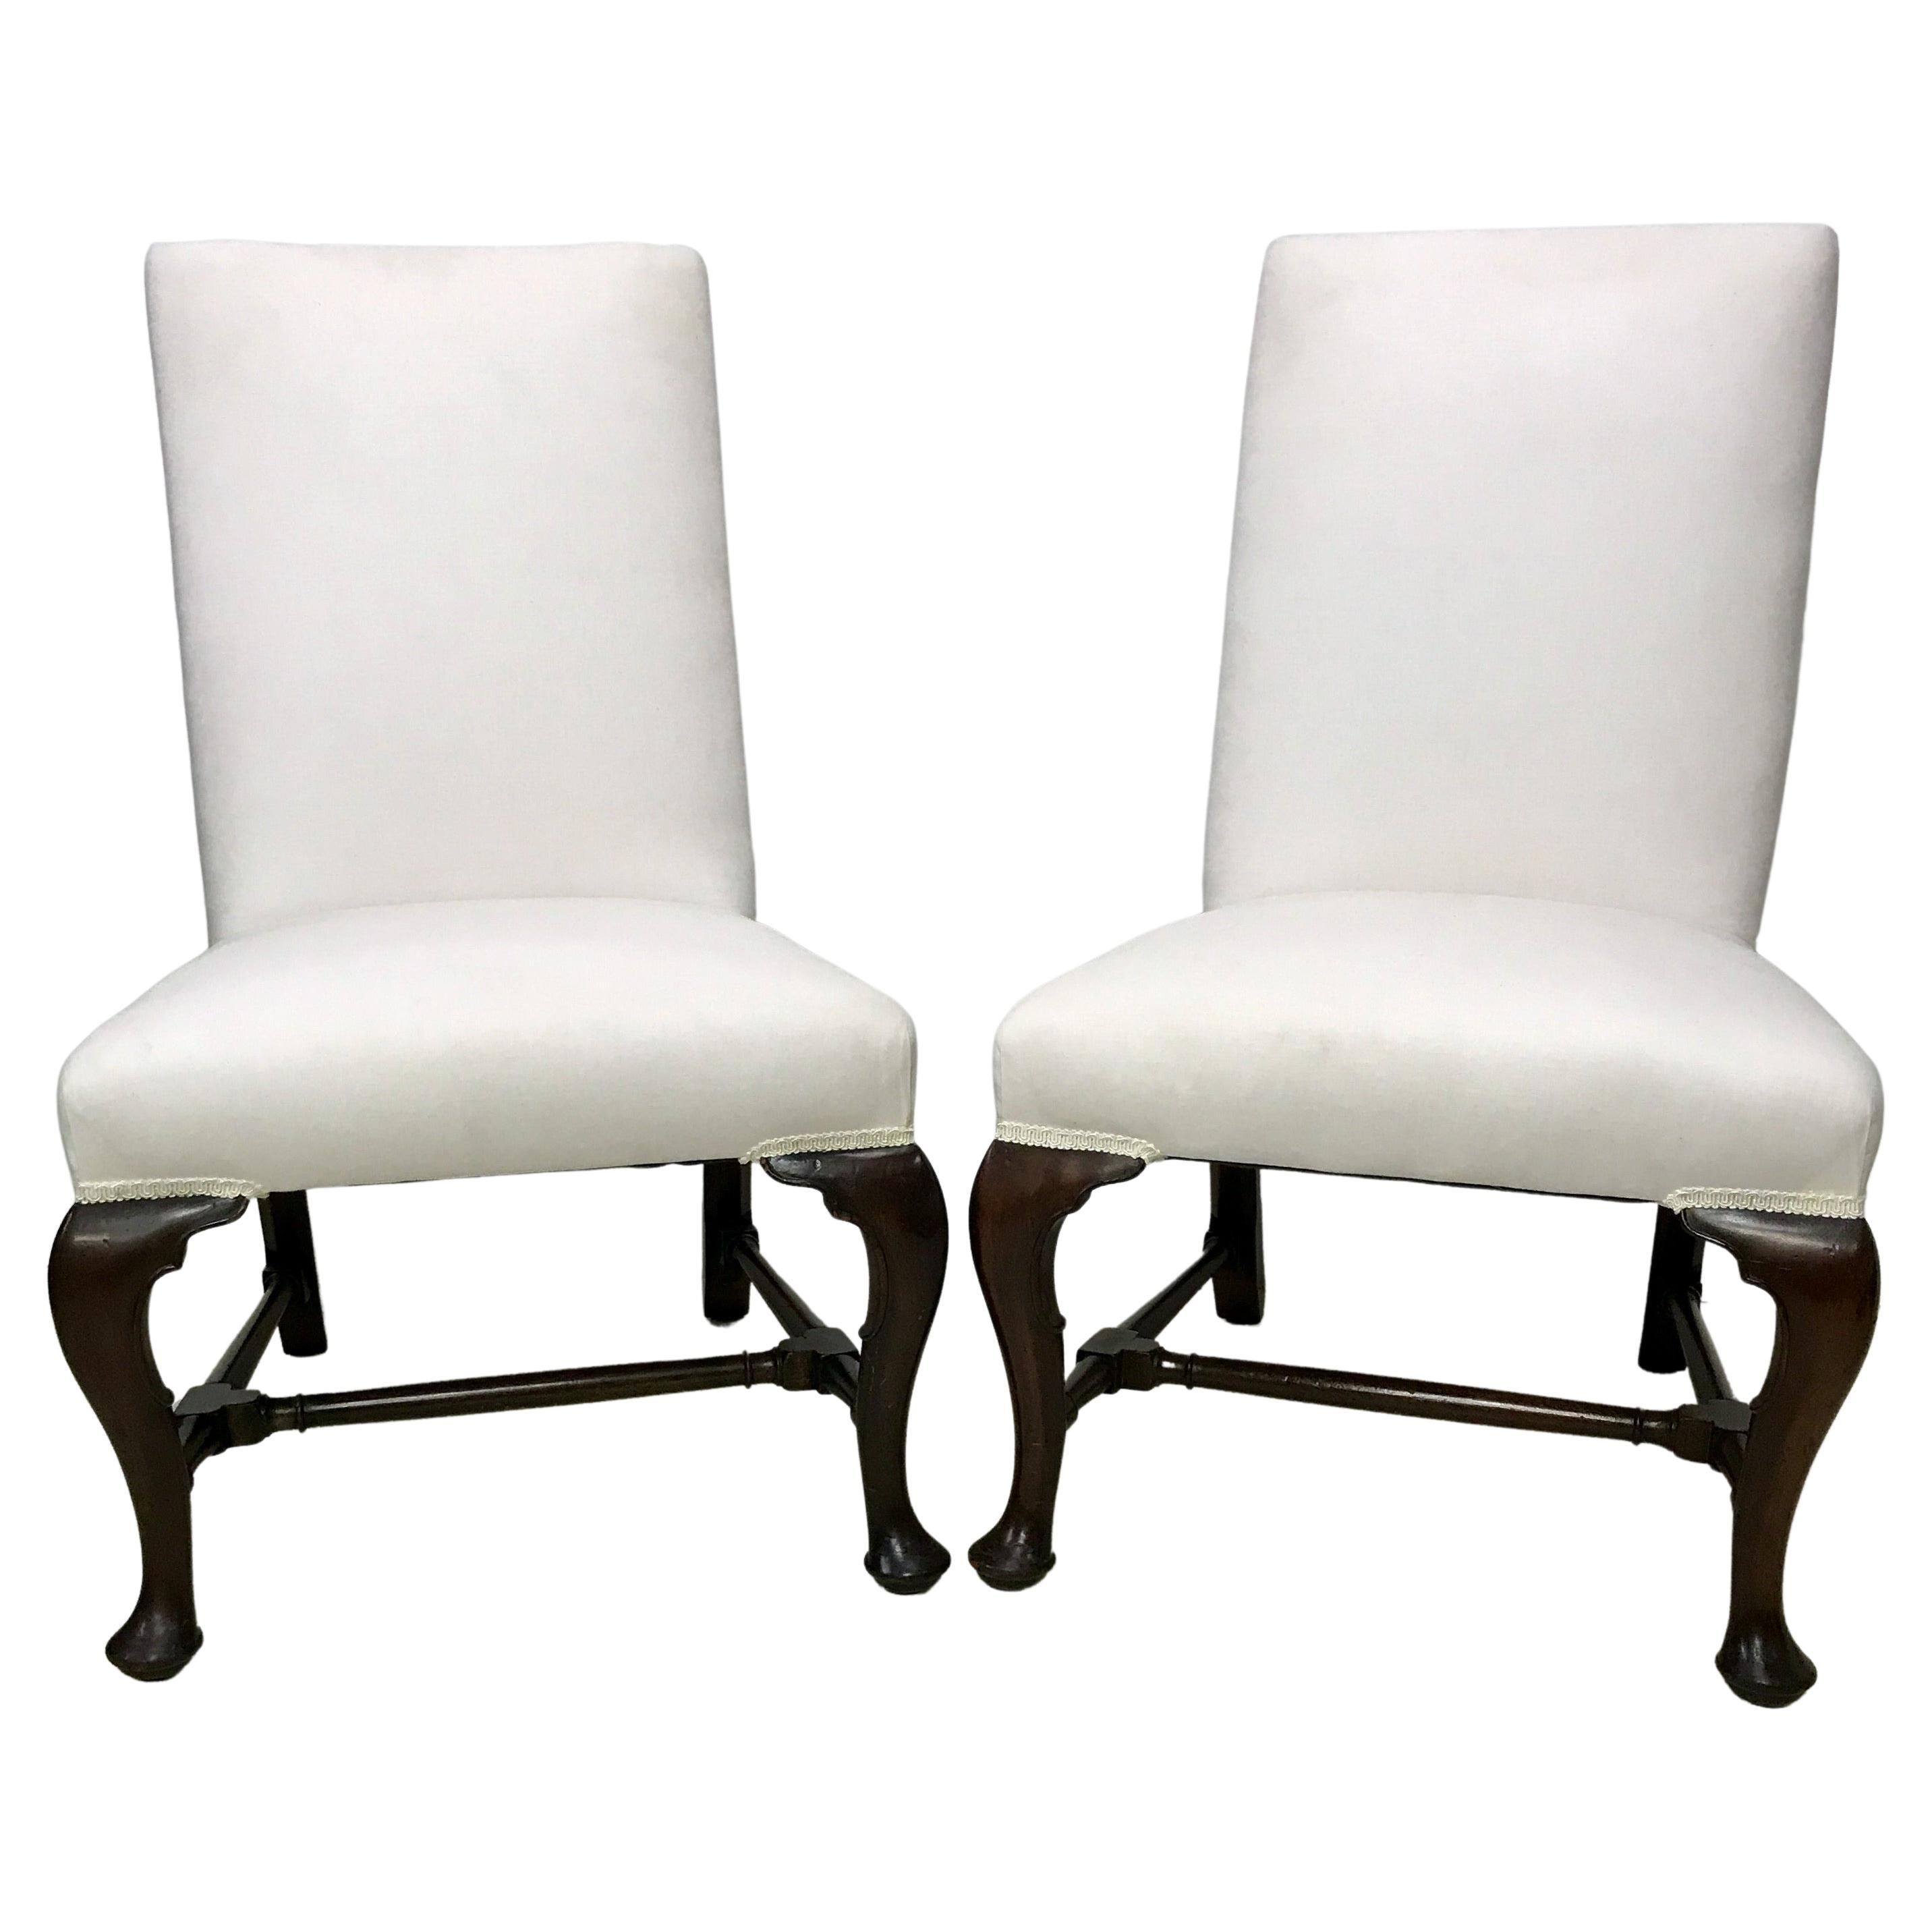 Pair of Queen Anne Style Mahogany Side Chairs, Early 20th Century For Sale